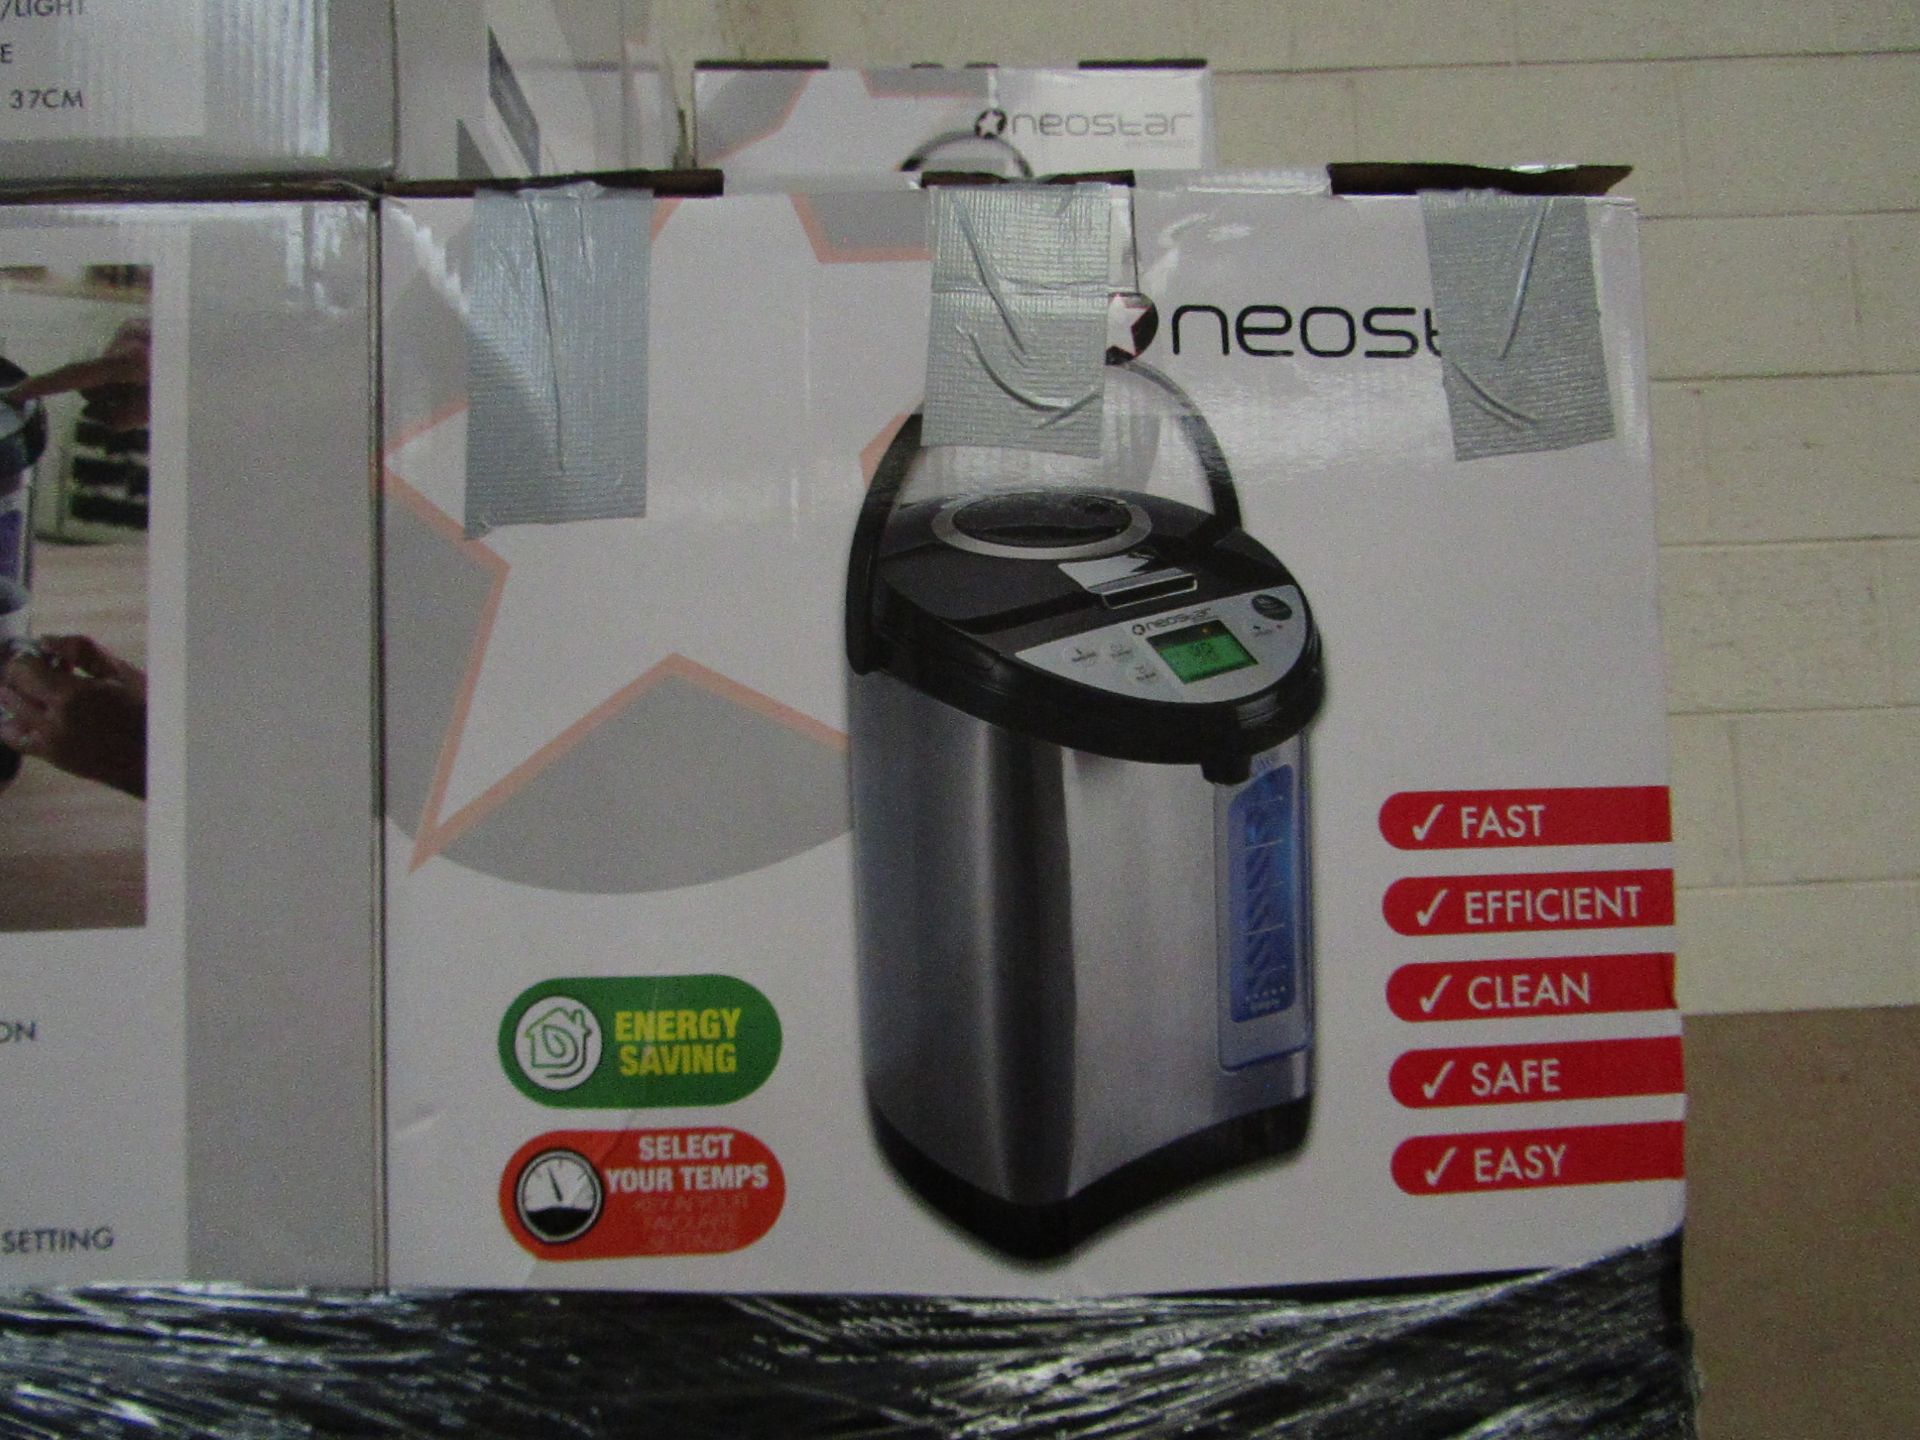 1 x Scotts of Stow Neostar Perma-Therm 3.5 Litre RRP £59.95 SKU SCO-DIR-3191414LH3 TOTAL RRP £59.